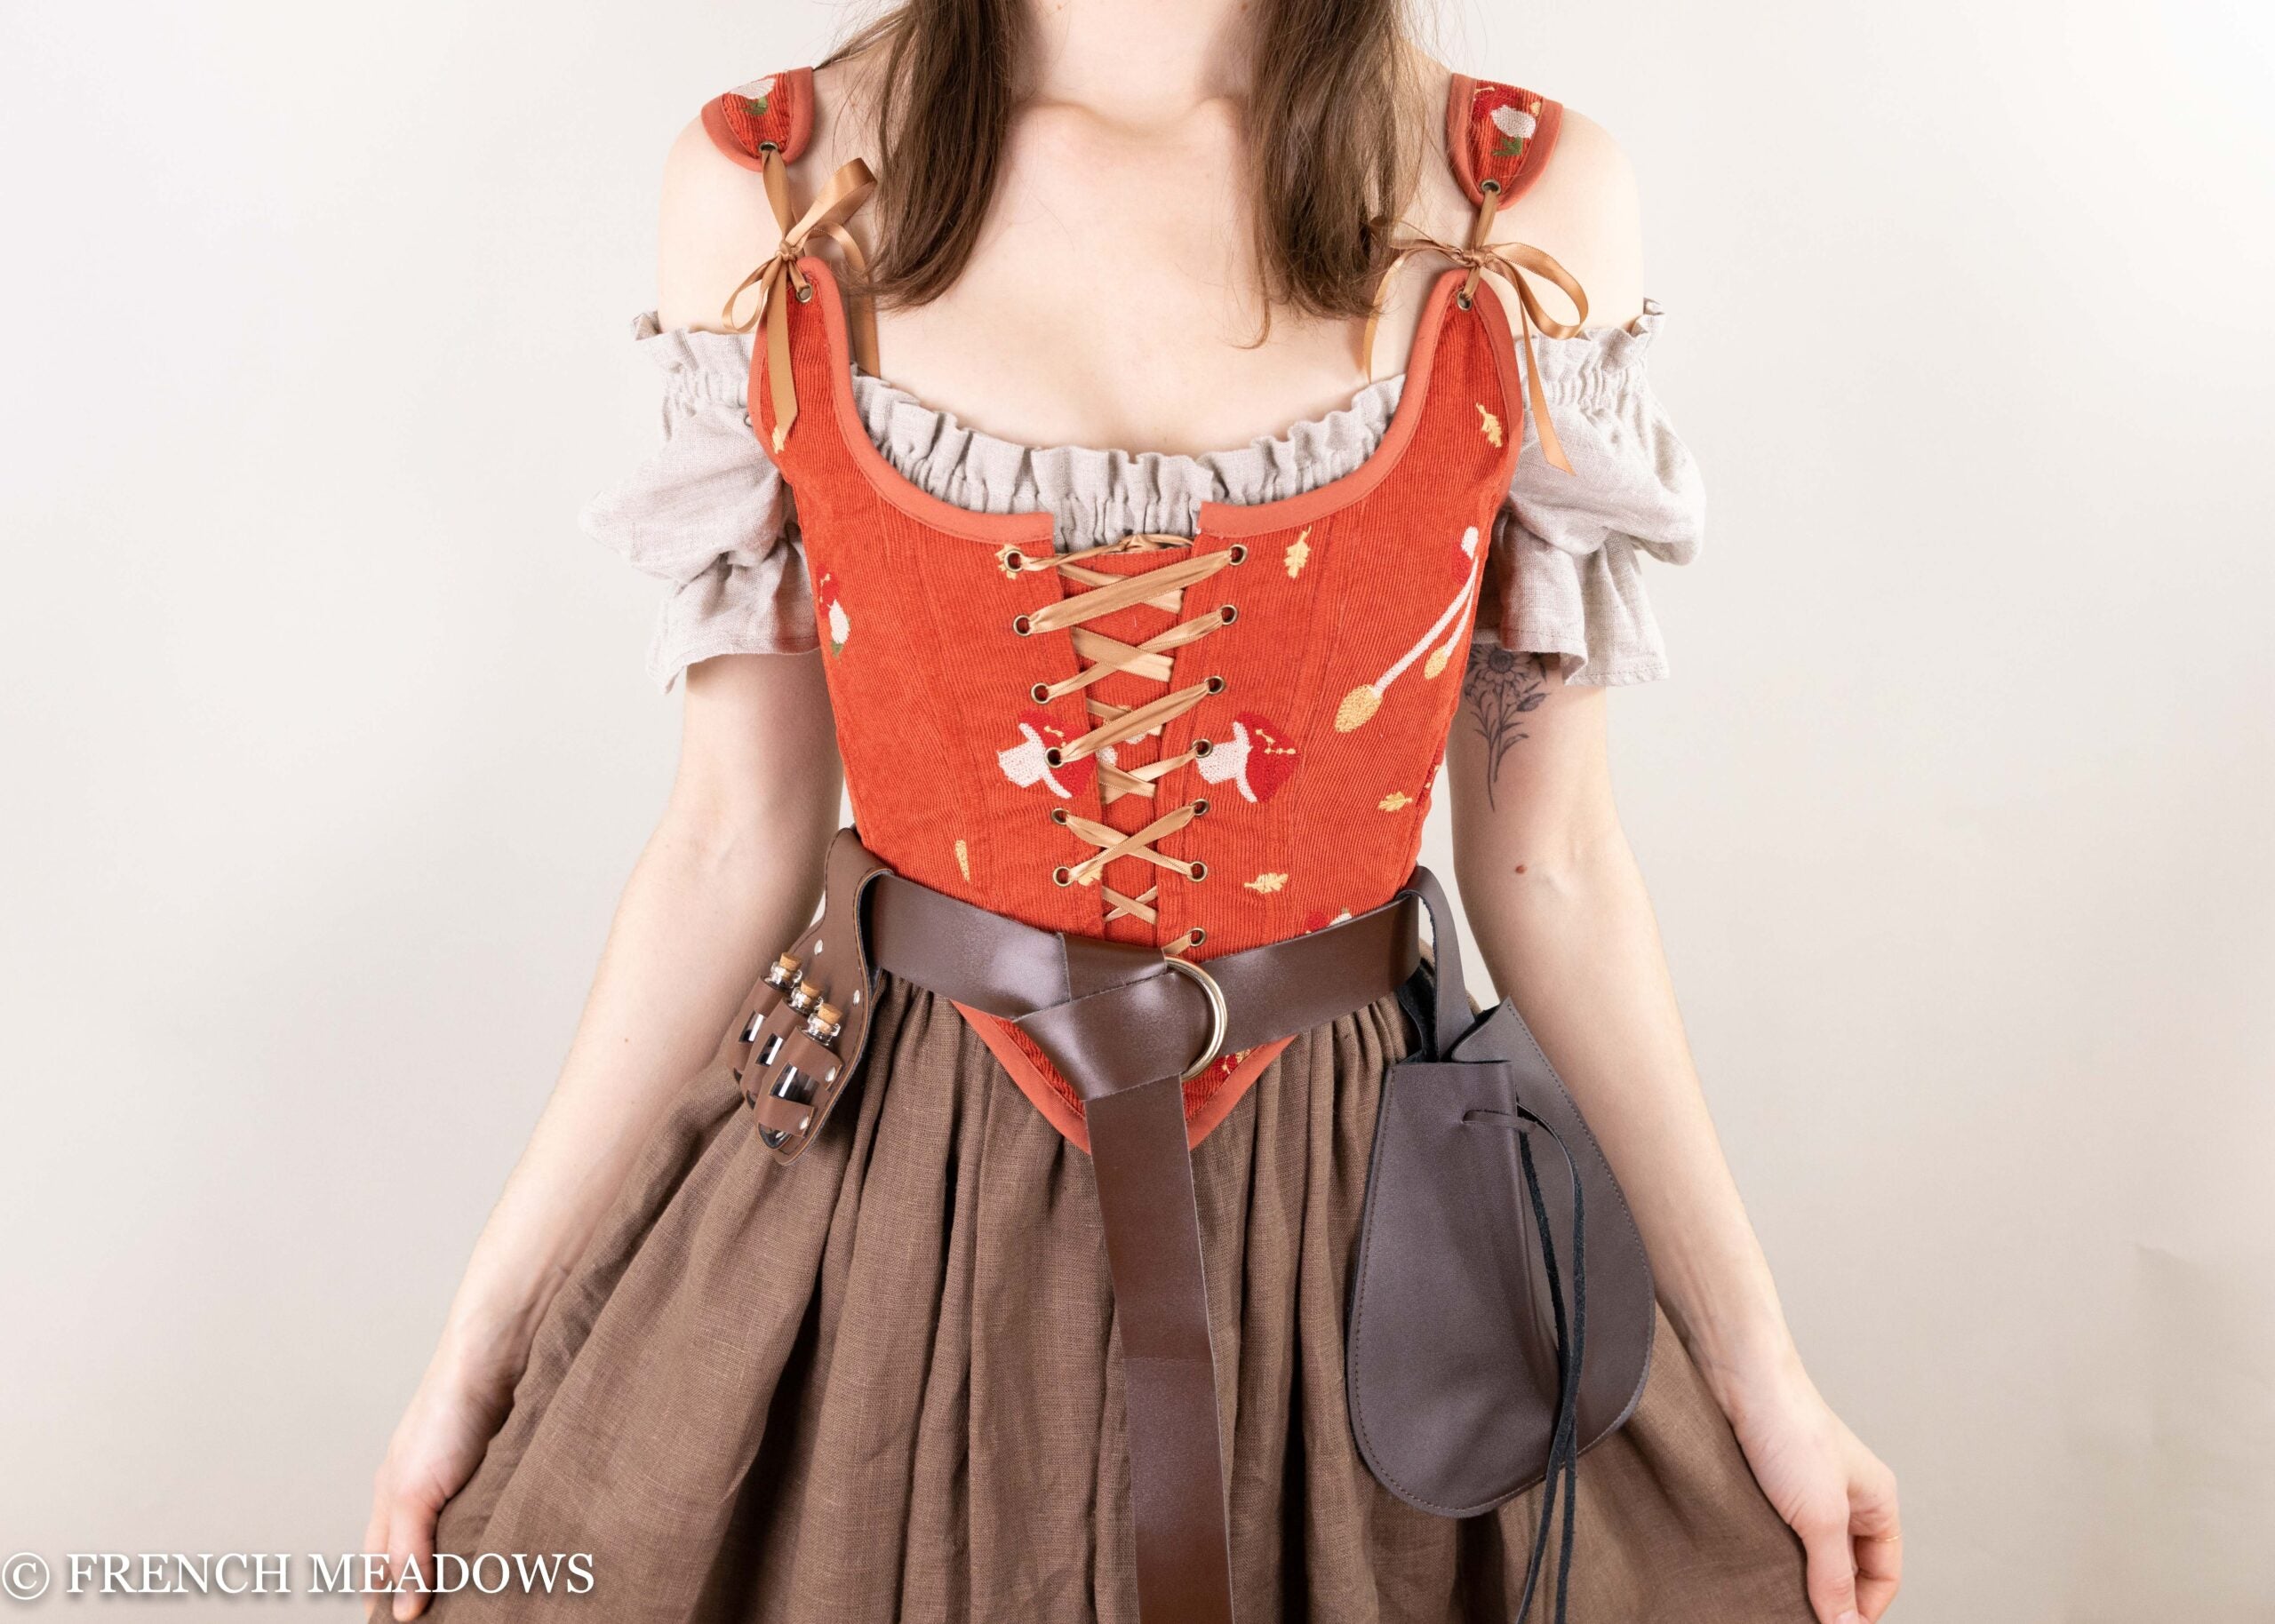 red renaissance fair bodice with embroidered mushroom design